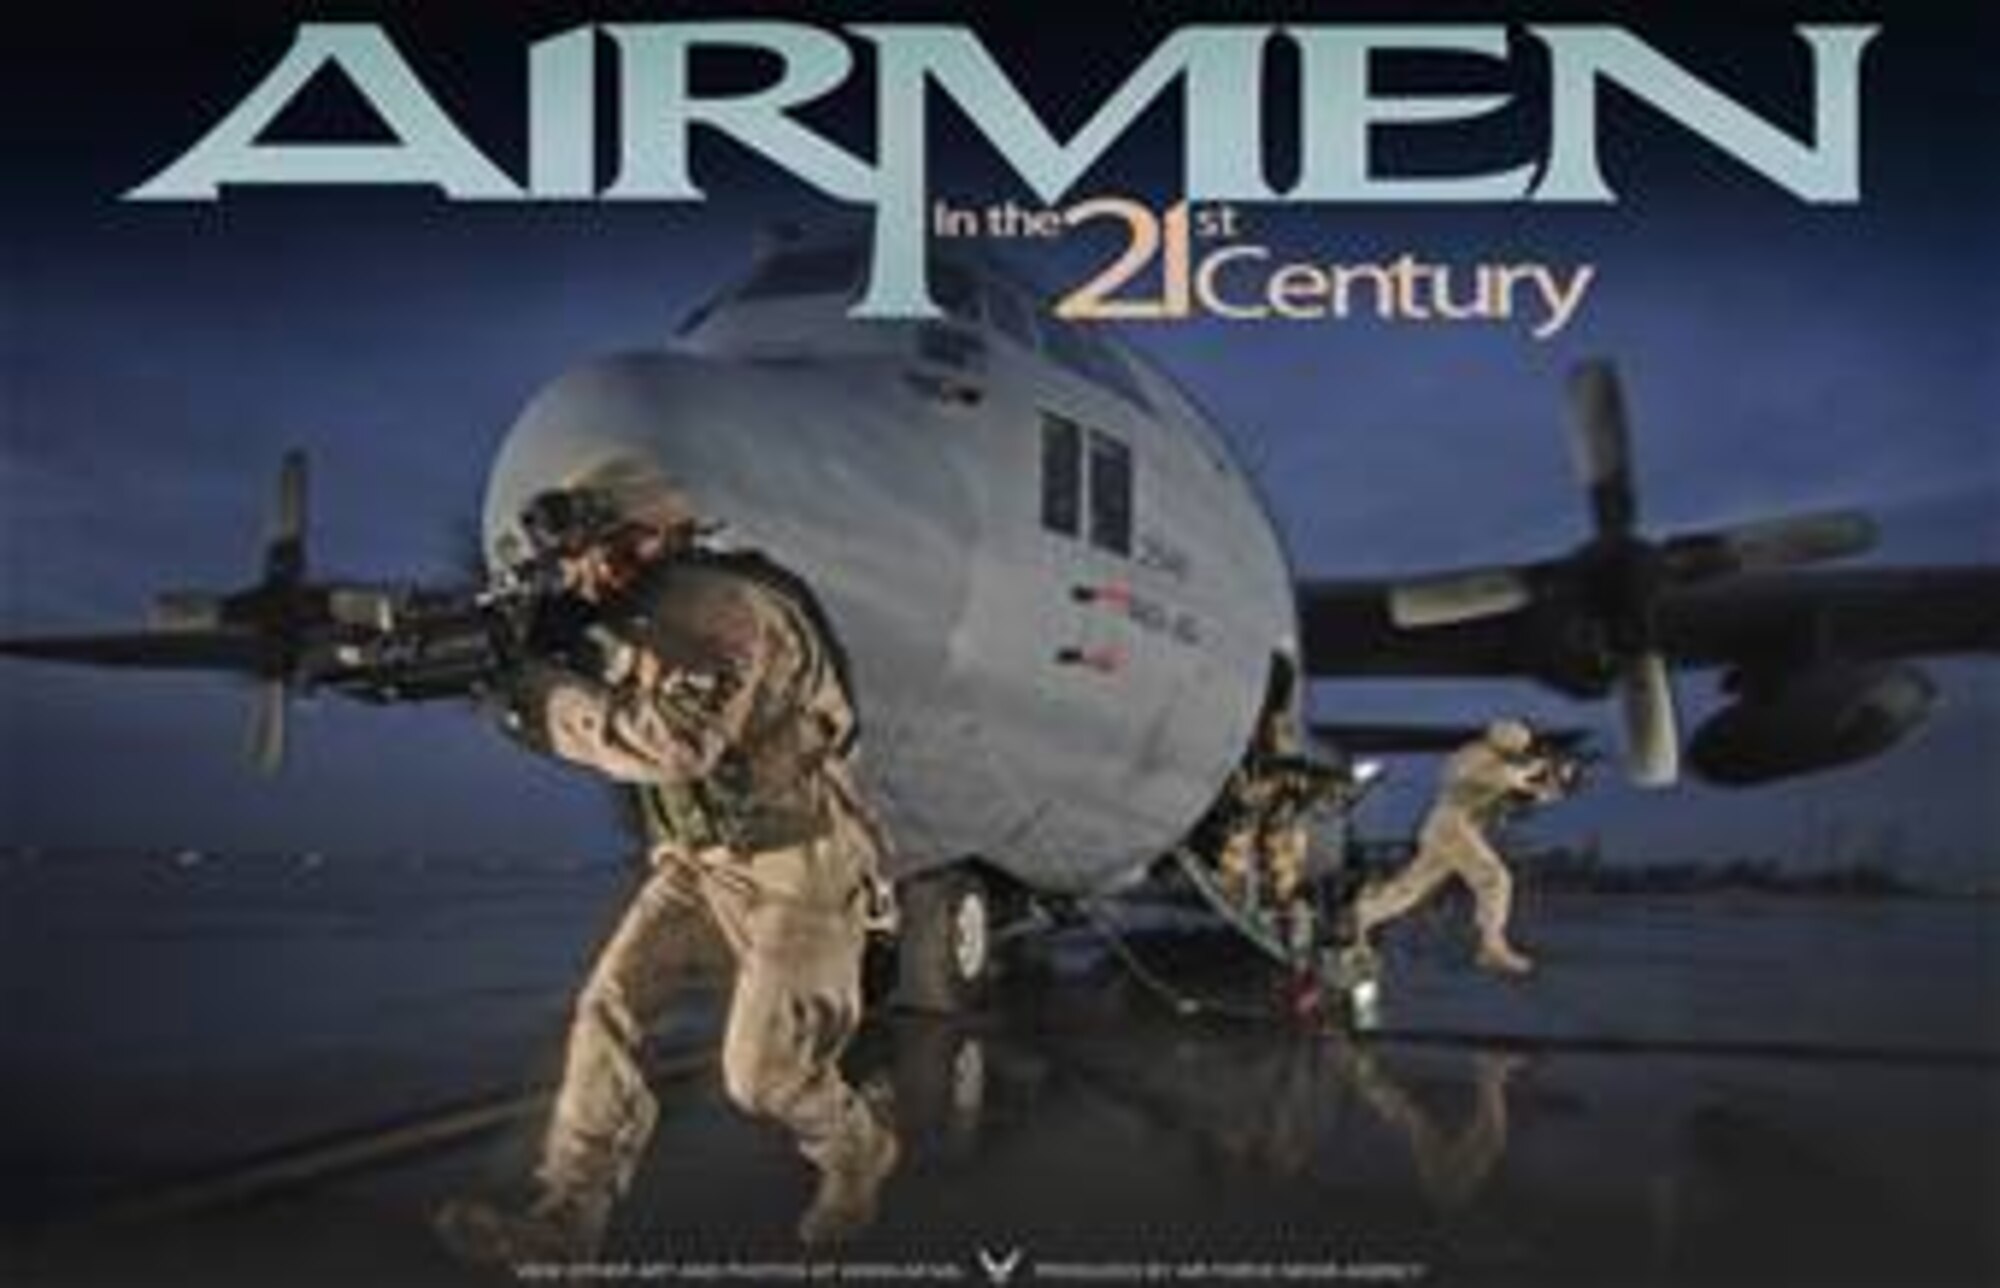 Staff Sgt. Tony Rivera and Senior Airmen Jason Bauer and Darryll Morley, provide aircraft security for a C-130 Hercules aircraft. U.S. Air Force photo by Master Sgt. Lance Cheung. This poster is 9x14 inches @ 300 ppi and was created by Virginia Reyes of the Air Force News Agency. This image is 10x6.5 @ 300 ppi and is available up to 14x9 @ 300 ppi. Poster is also available as a PDF